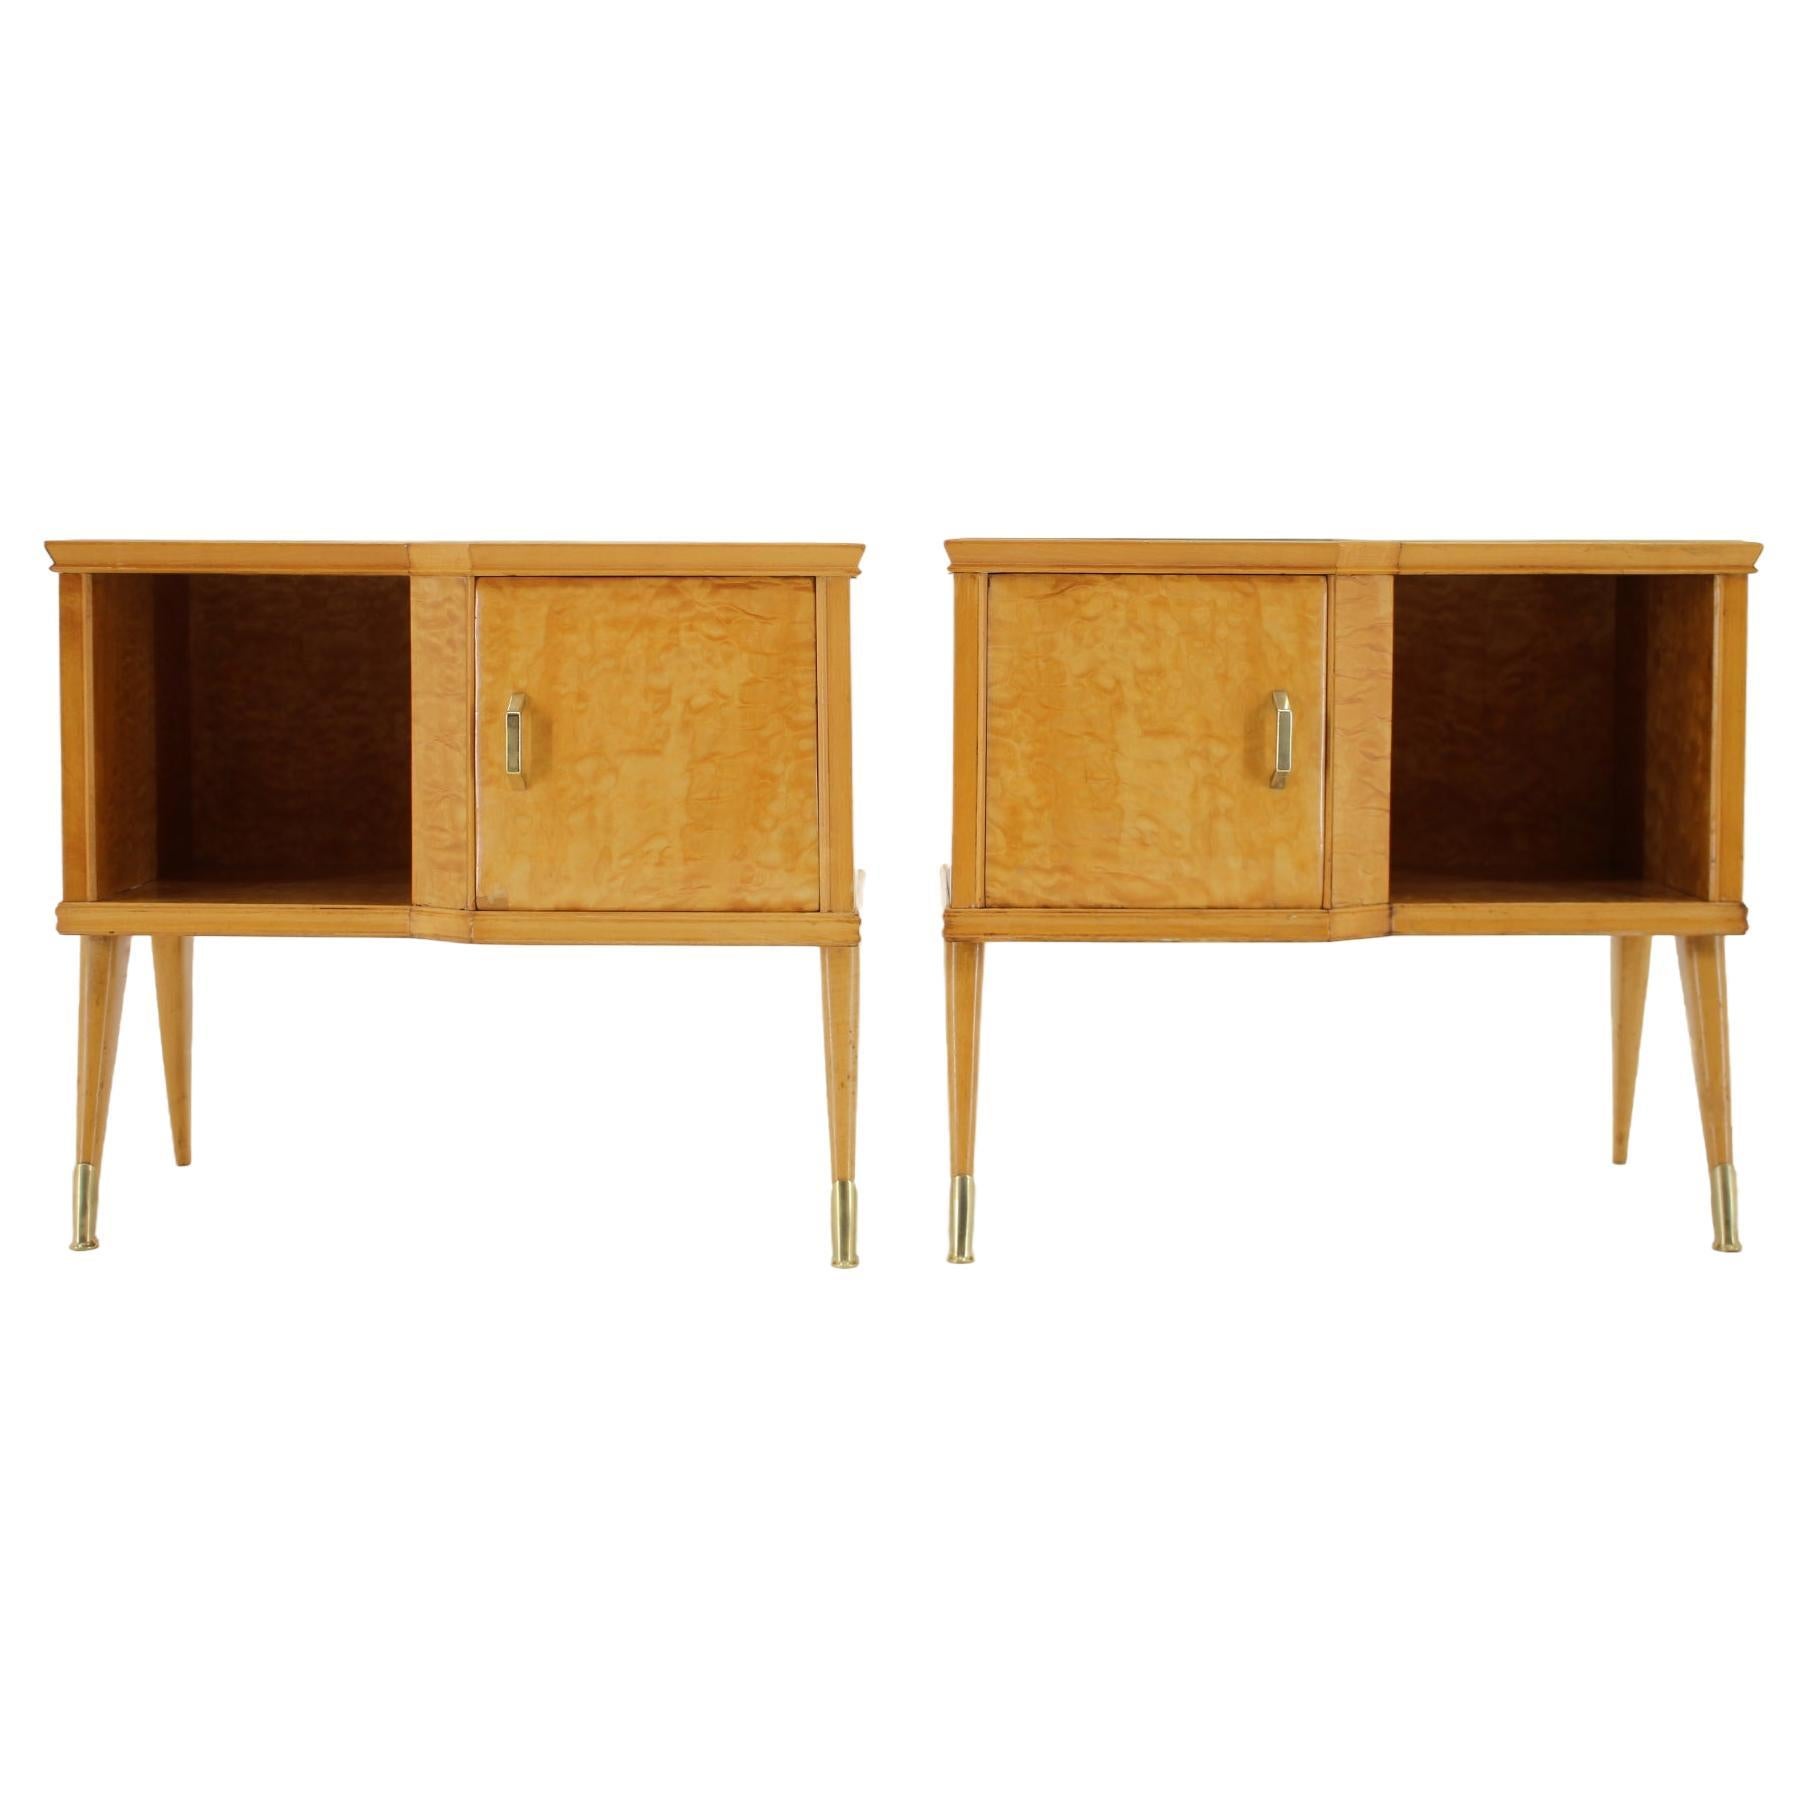 1960s Pair of Italian Bedside Tables in High Gloss Finish For Sale